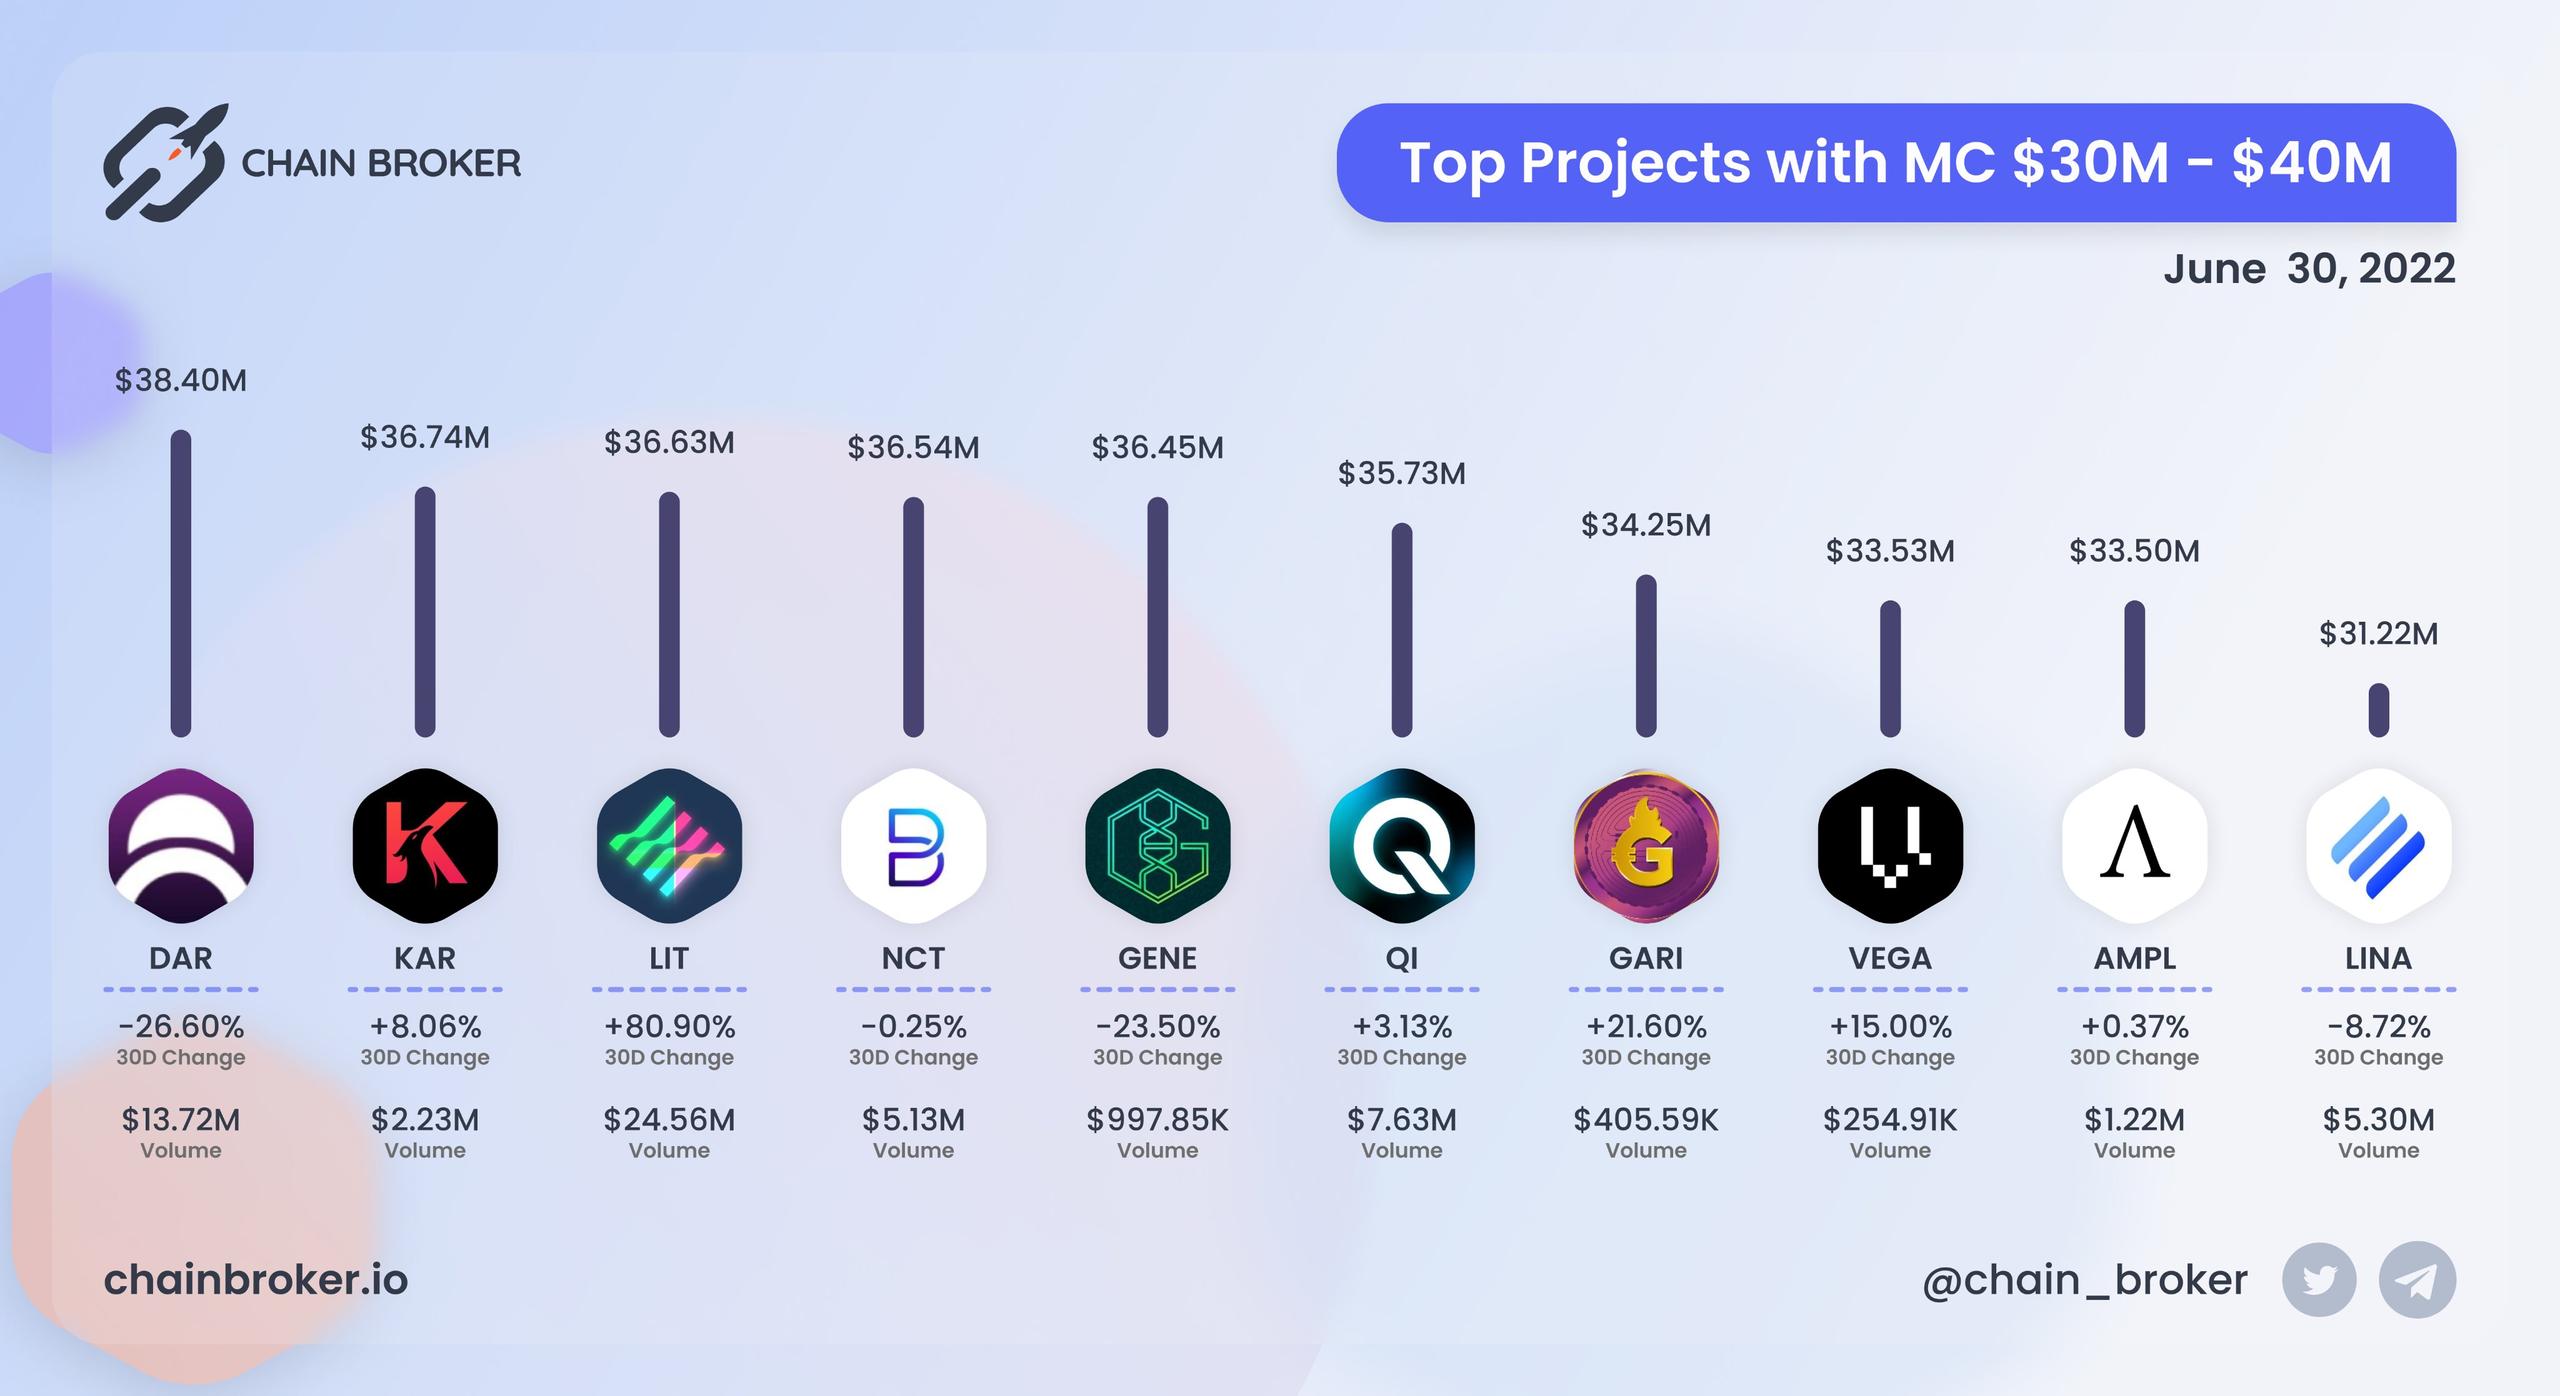 Top projects with Market Cap $30M - $40M